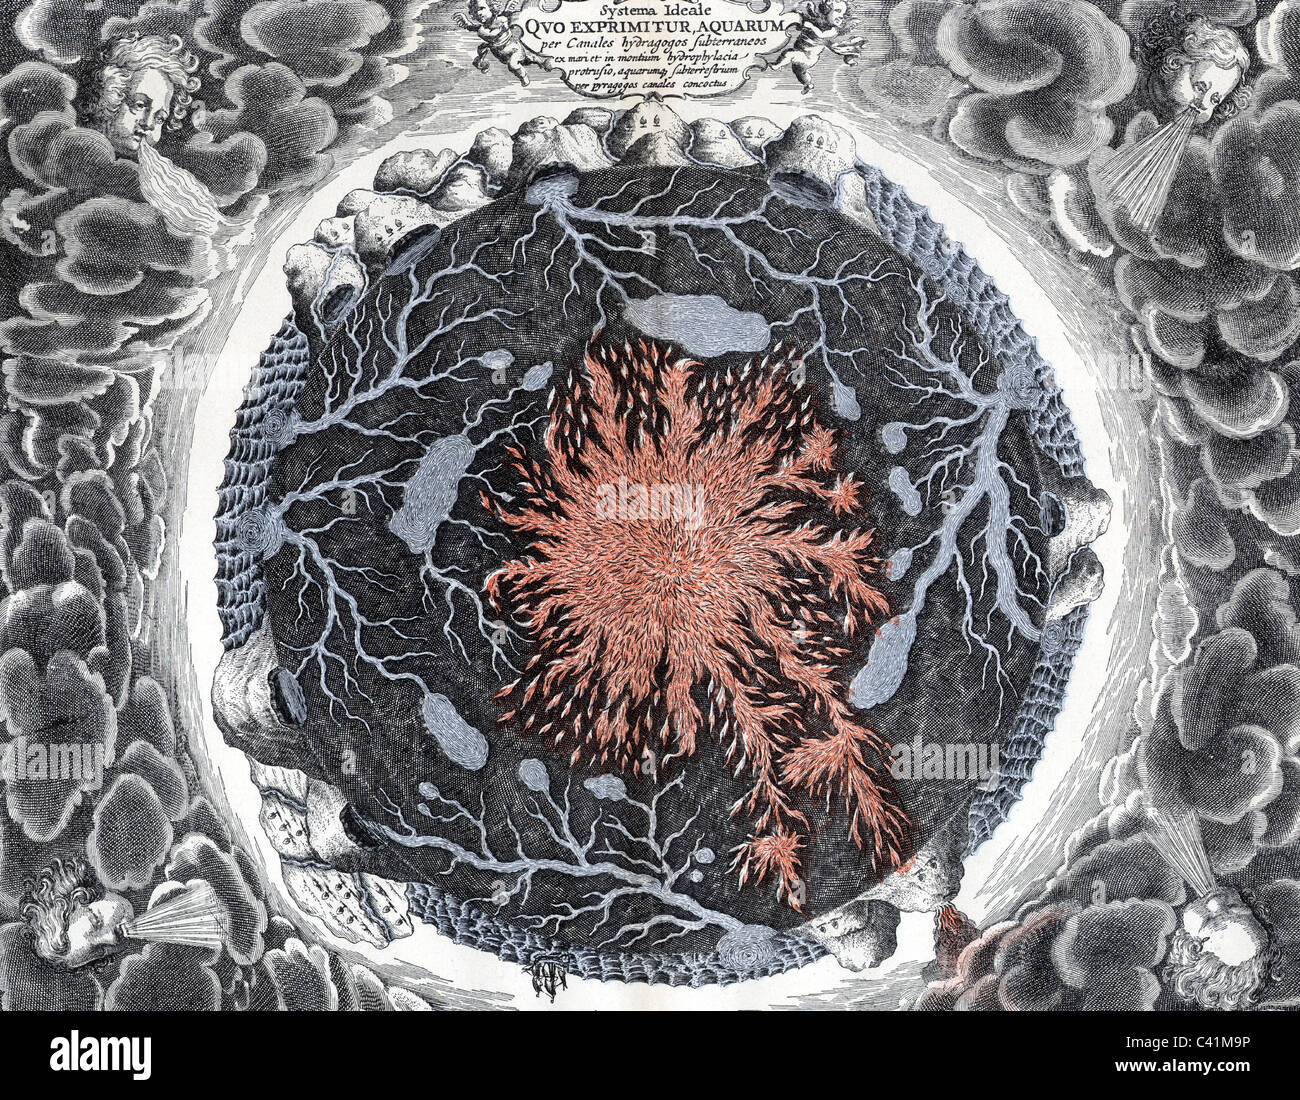 science, geology, central fire with lakes and rivers of the underworld, 'Mundus subterraneus', by Athanasius Kircher, 1665, Additional-Rights-Clearences-Not Available Stock Photo